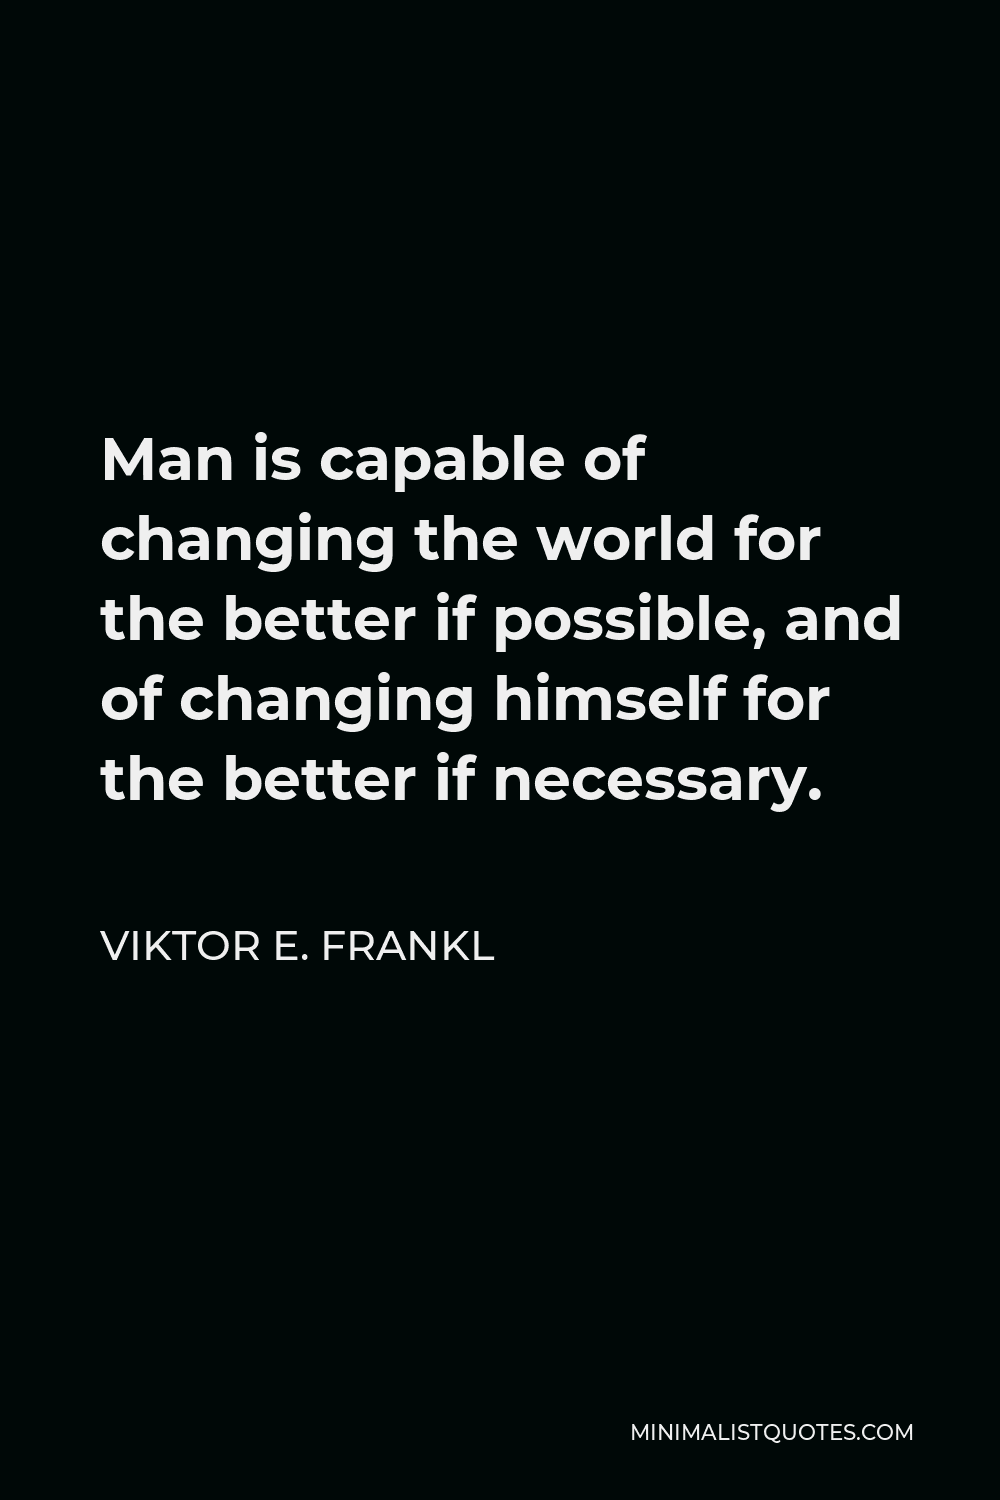 Viktor E. Frankl Quote - Man is capable of changing the world for the better if possible, and of changing himself for the better if necessary.